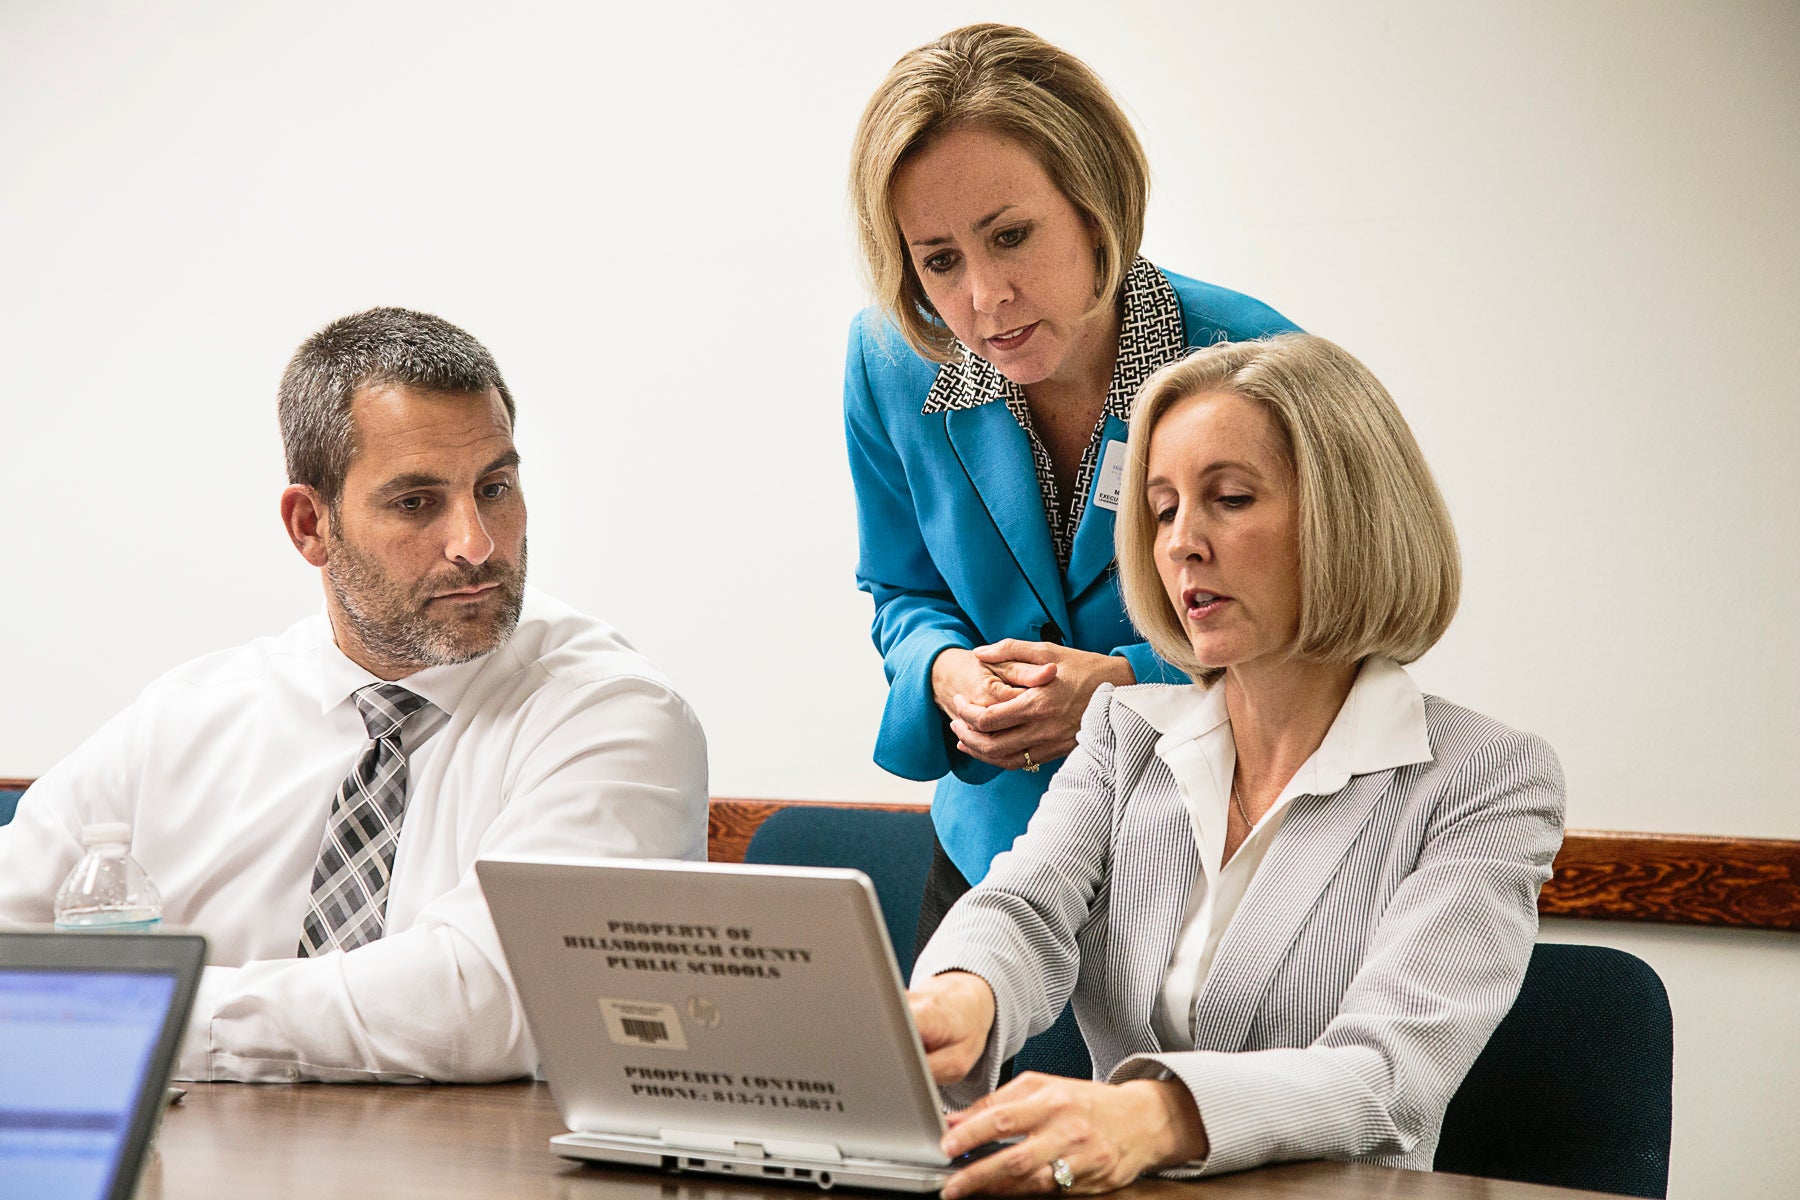 Three education leaders look at something on a laptop screen.